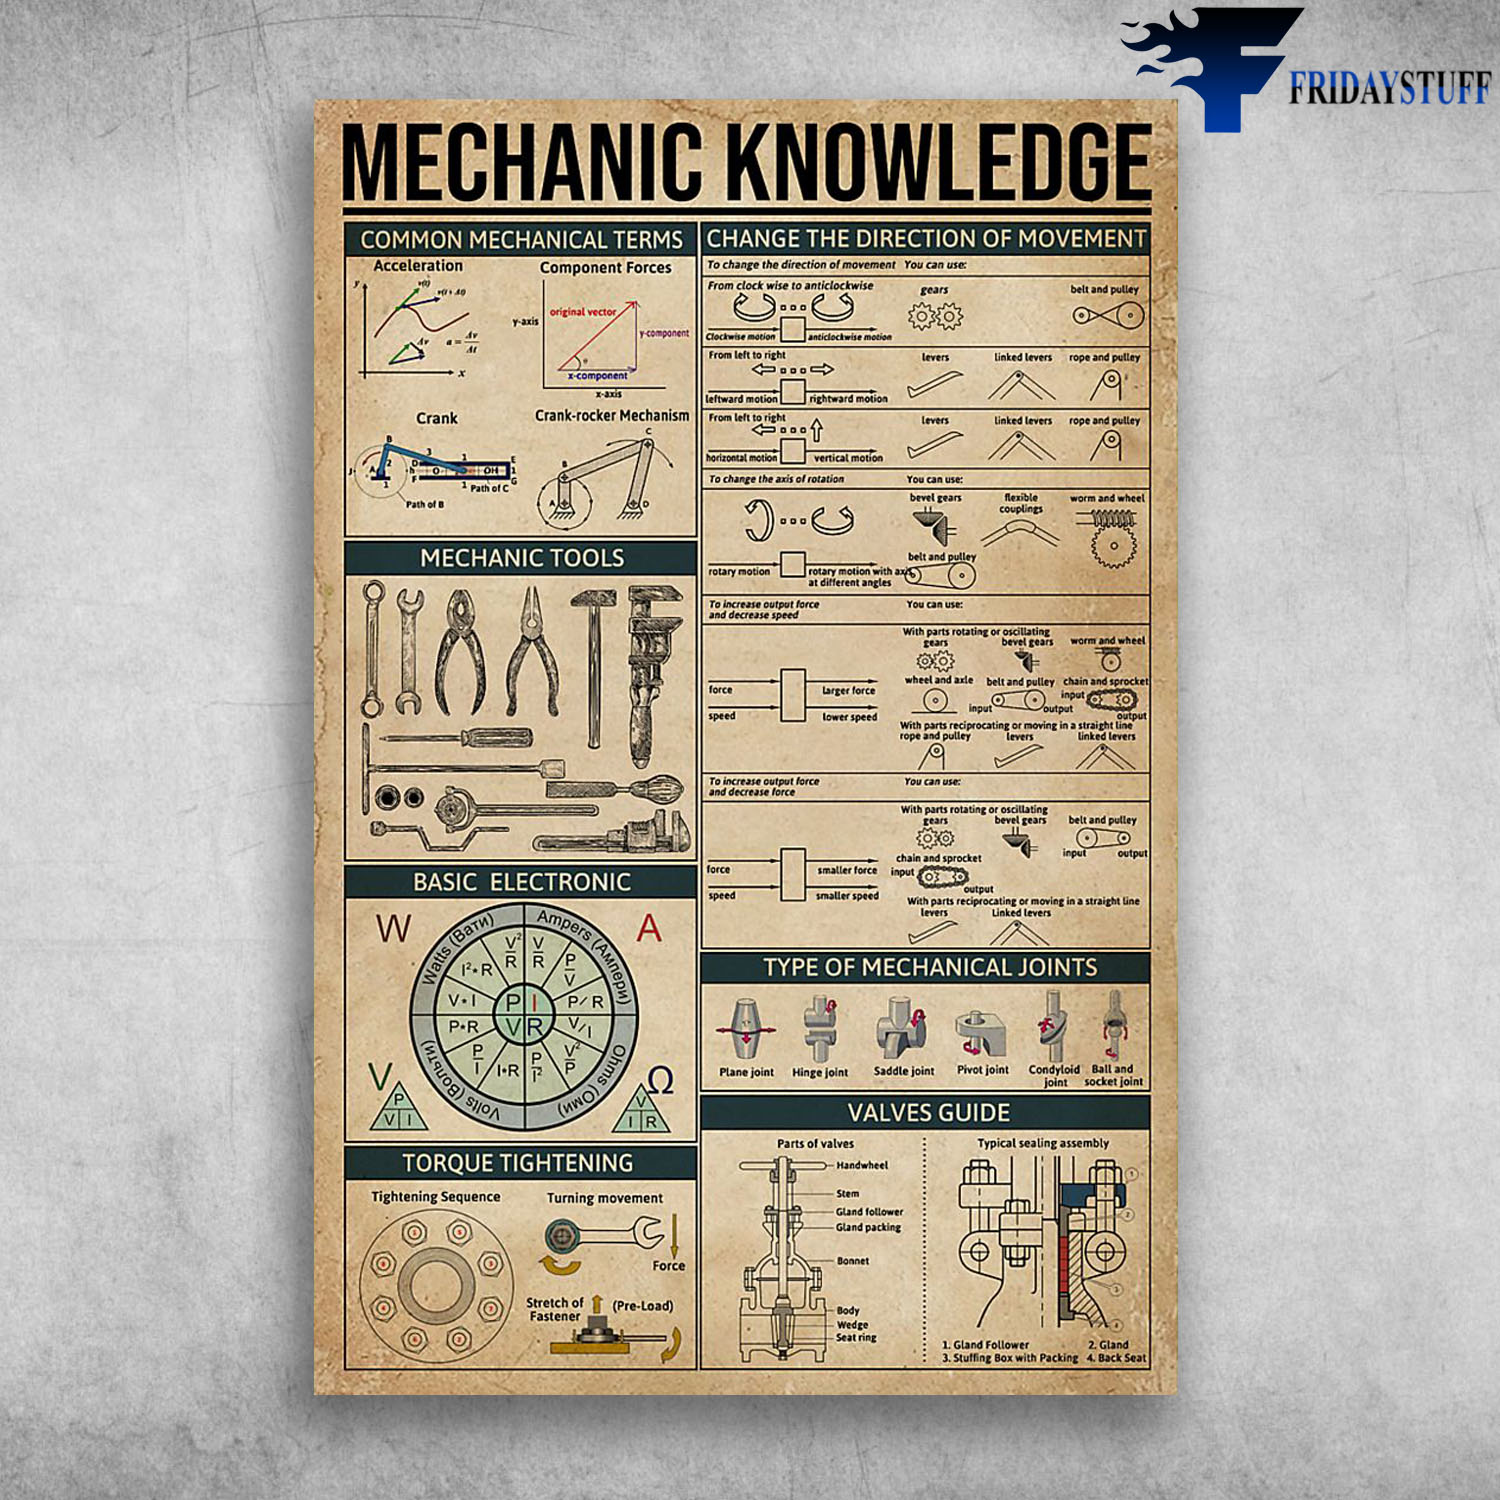 Mechanic Knowledge Common Mechanical Terms Change The Direction Of Movement